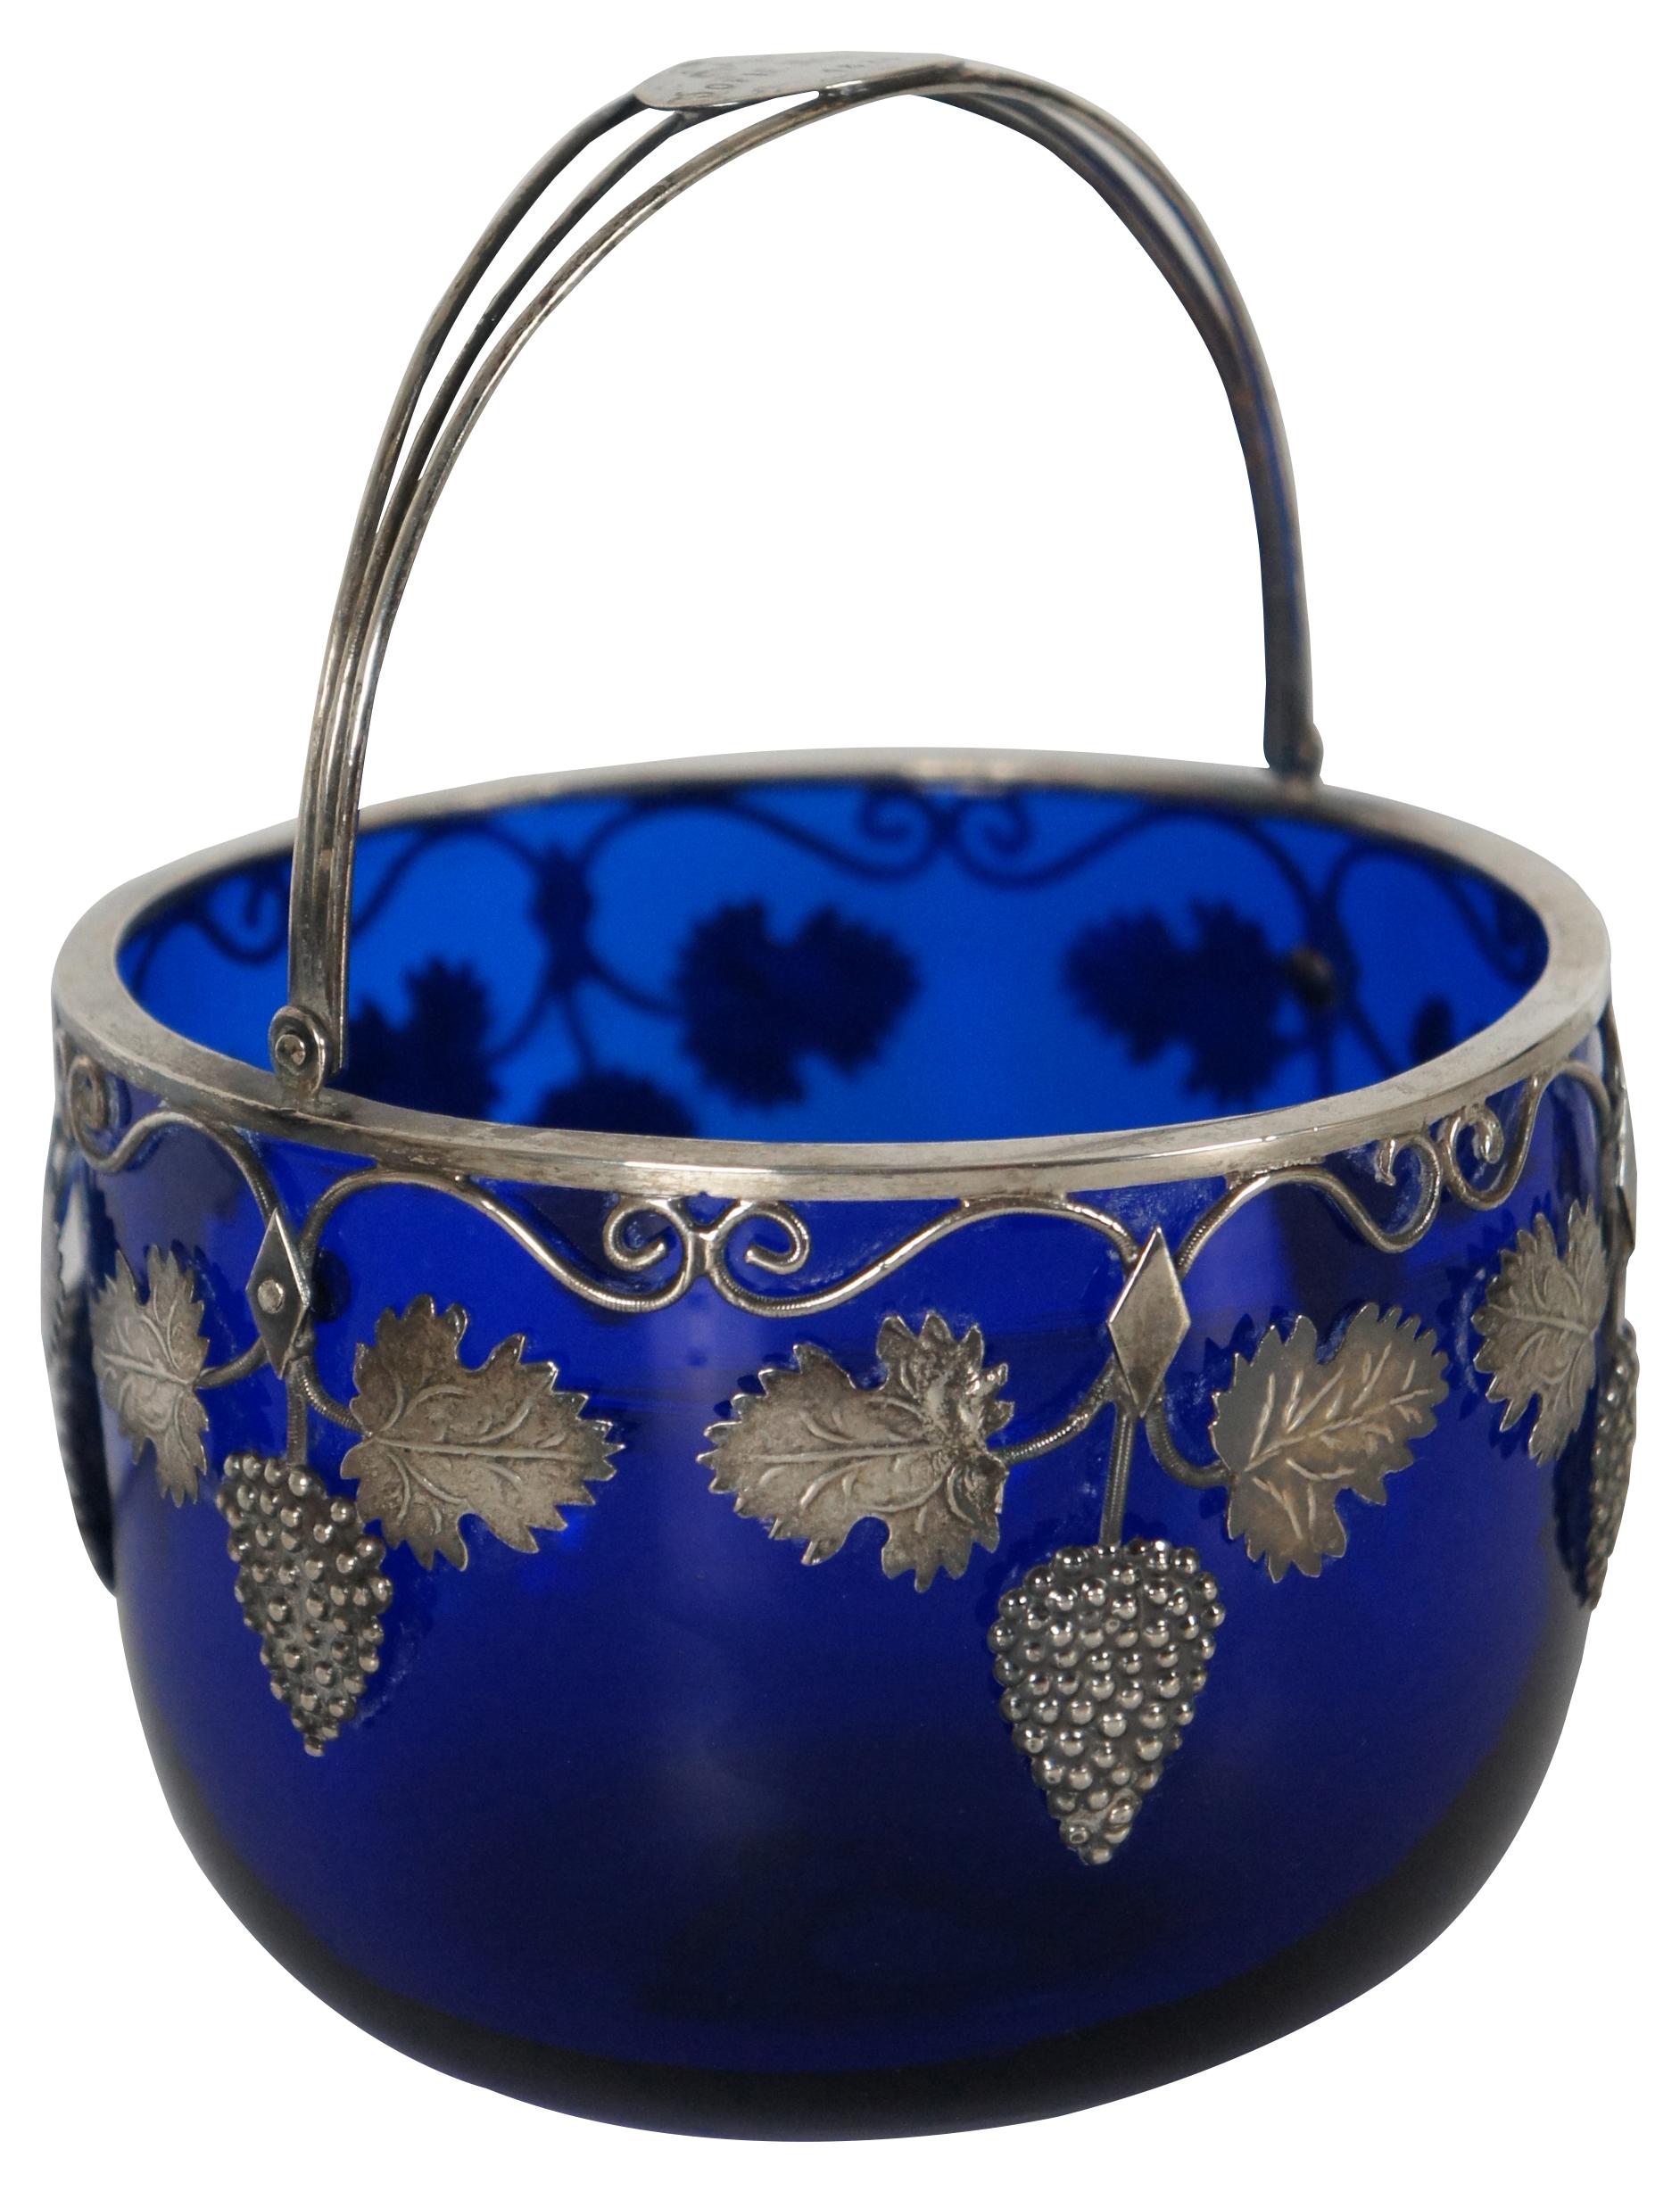 Antique European hand blown Georgian / Edwardian cobalt blue glass candy basket or sugar bowl with sterling silver 925 handle and strawberry leaf design, engraved with “Sophie Nodskov 1 April 1828.”

Measures: 4.5” x 3.375” / height of handle –